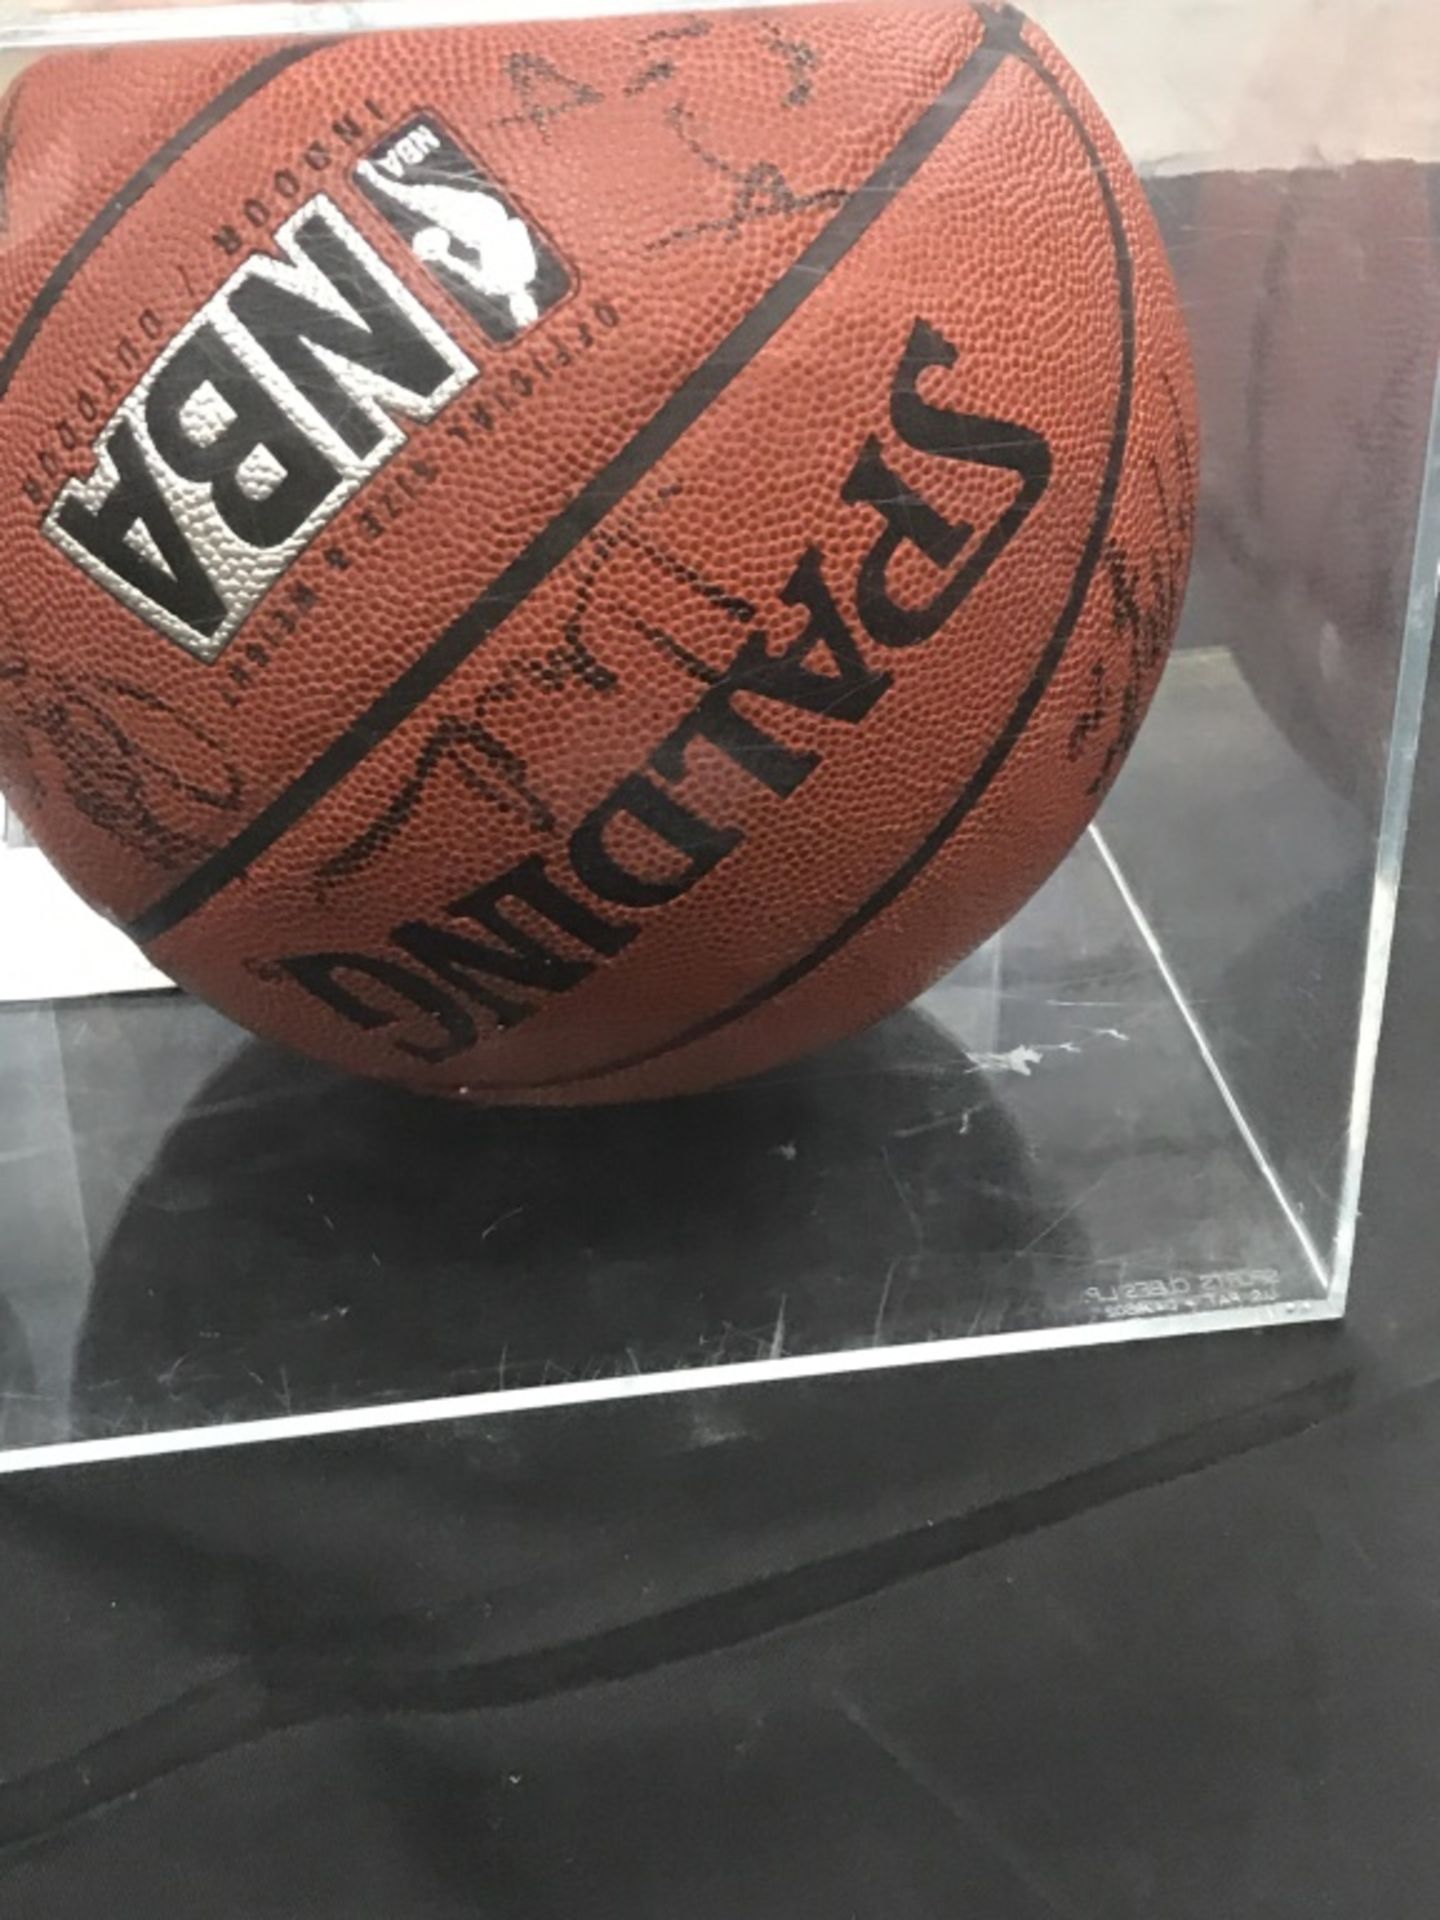 Basketball Signed by Rockets Team - Image 8 of 10